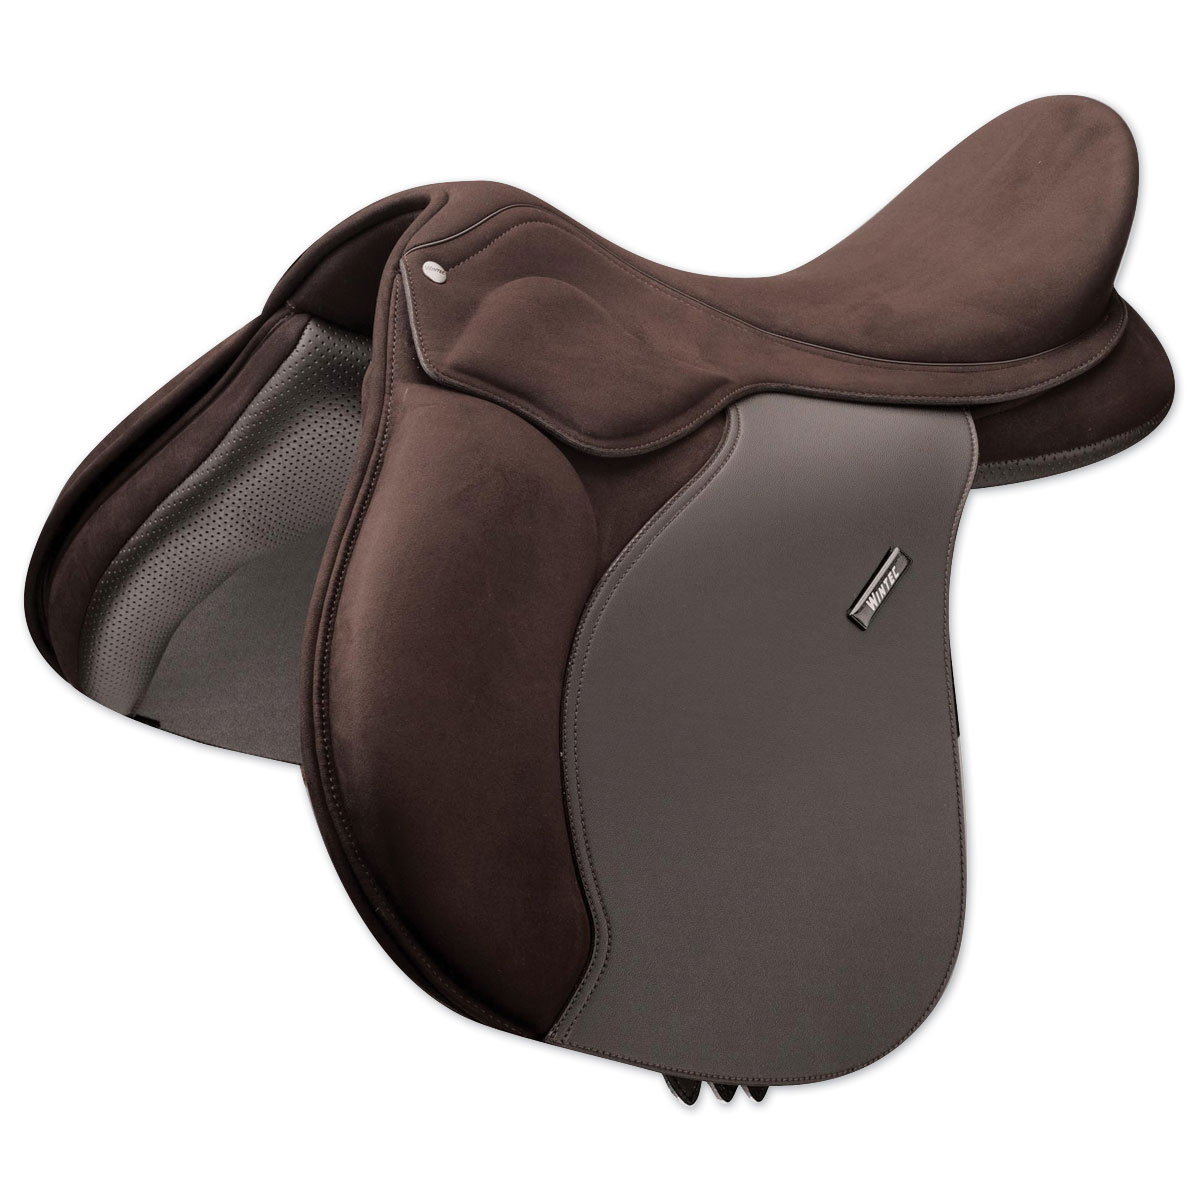 Wintec Wintec 2000 All Purpose Saddle 17.5" Adjustable Gullet and CAIR System 